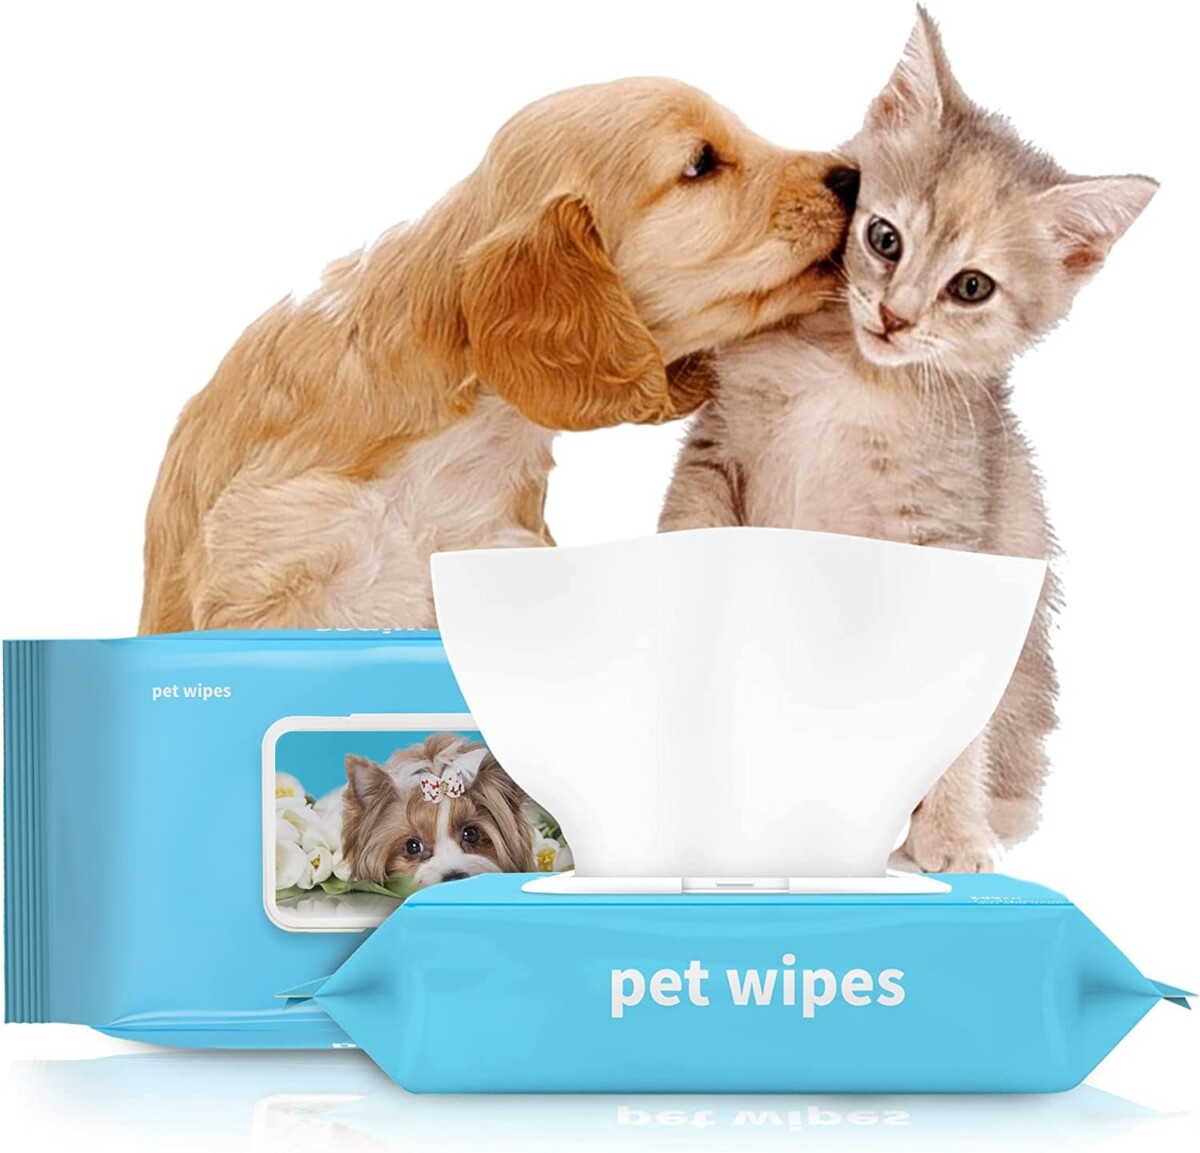 Alea's Deals Pet Wipes for Dog and Cat -Grooming Wipes 100 Count-50%OFF  